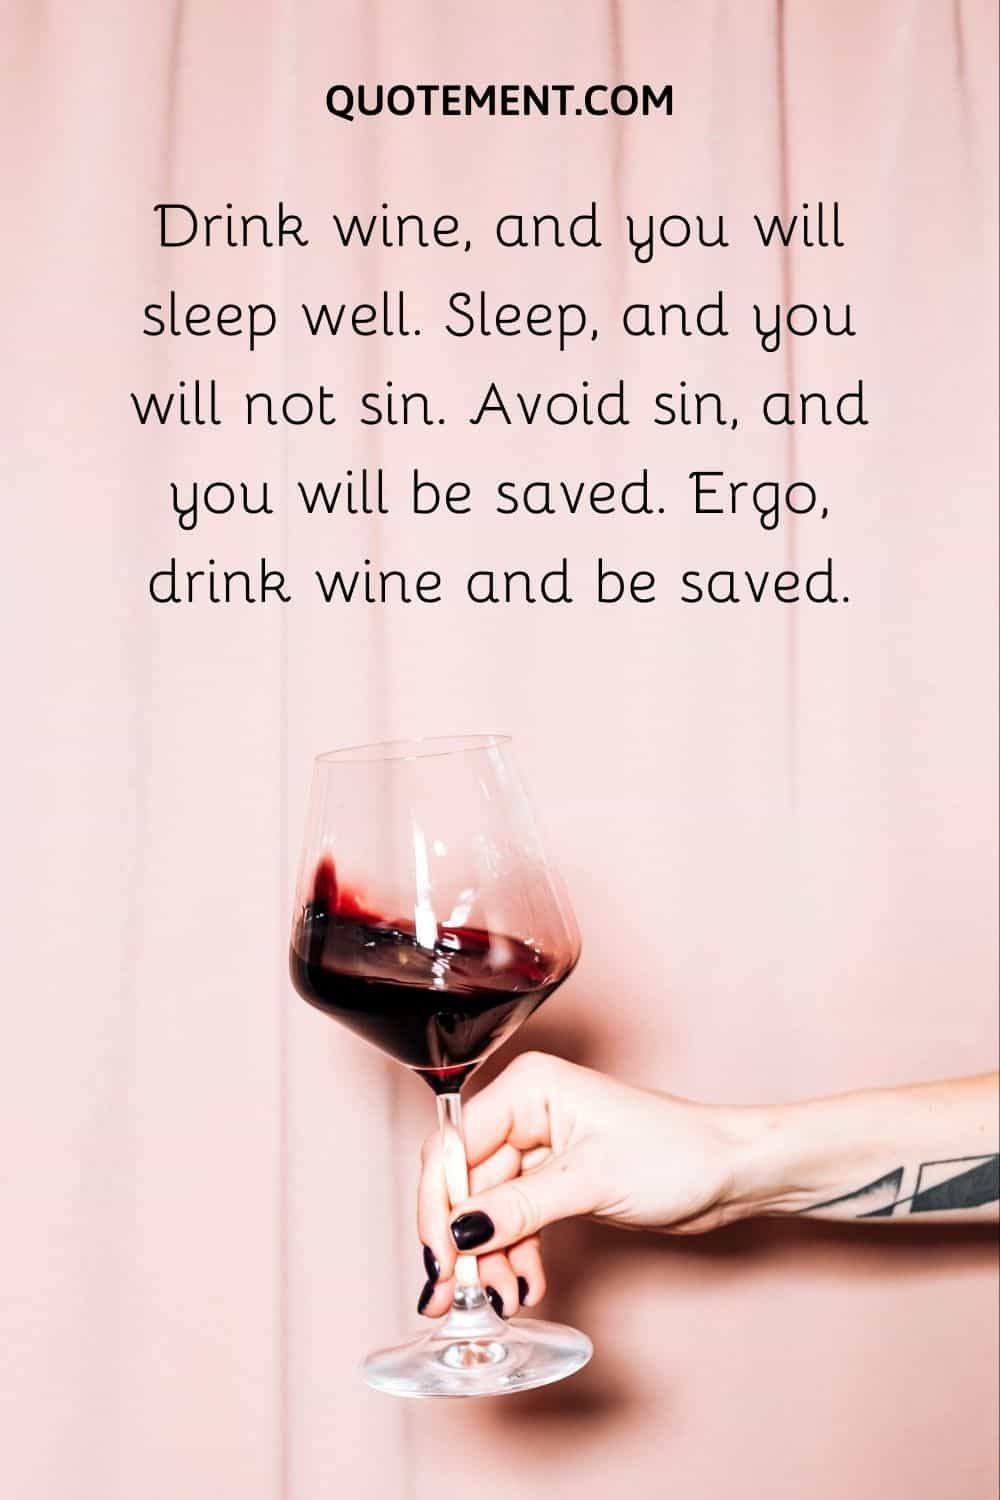 Drink wine, and you will sleep well.